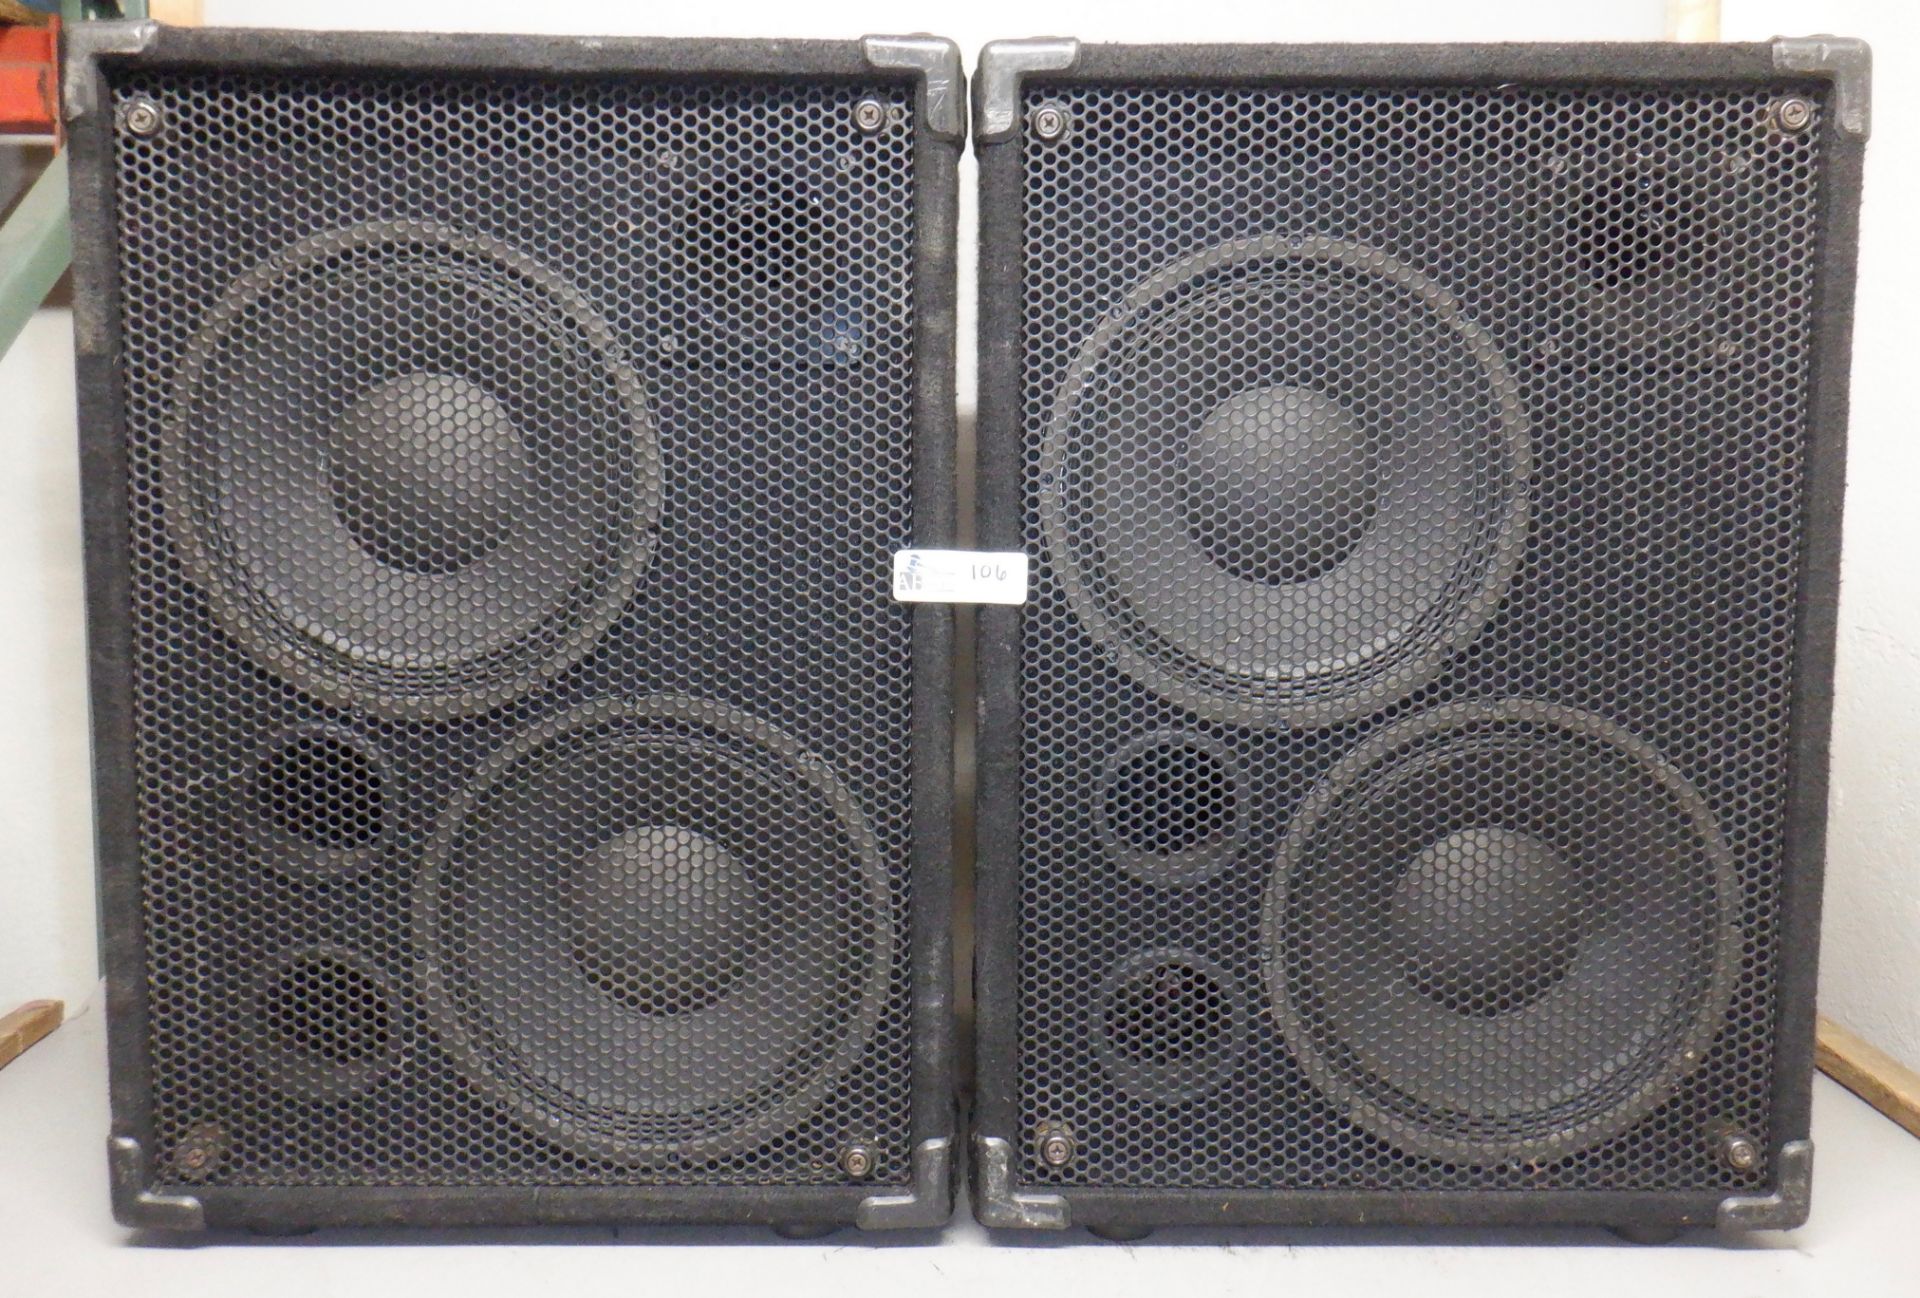 LOT OF 2 ACOUSTIC BASS SPEAKERS WITH STANDS - Image 4 of 7